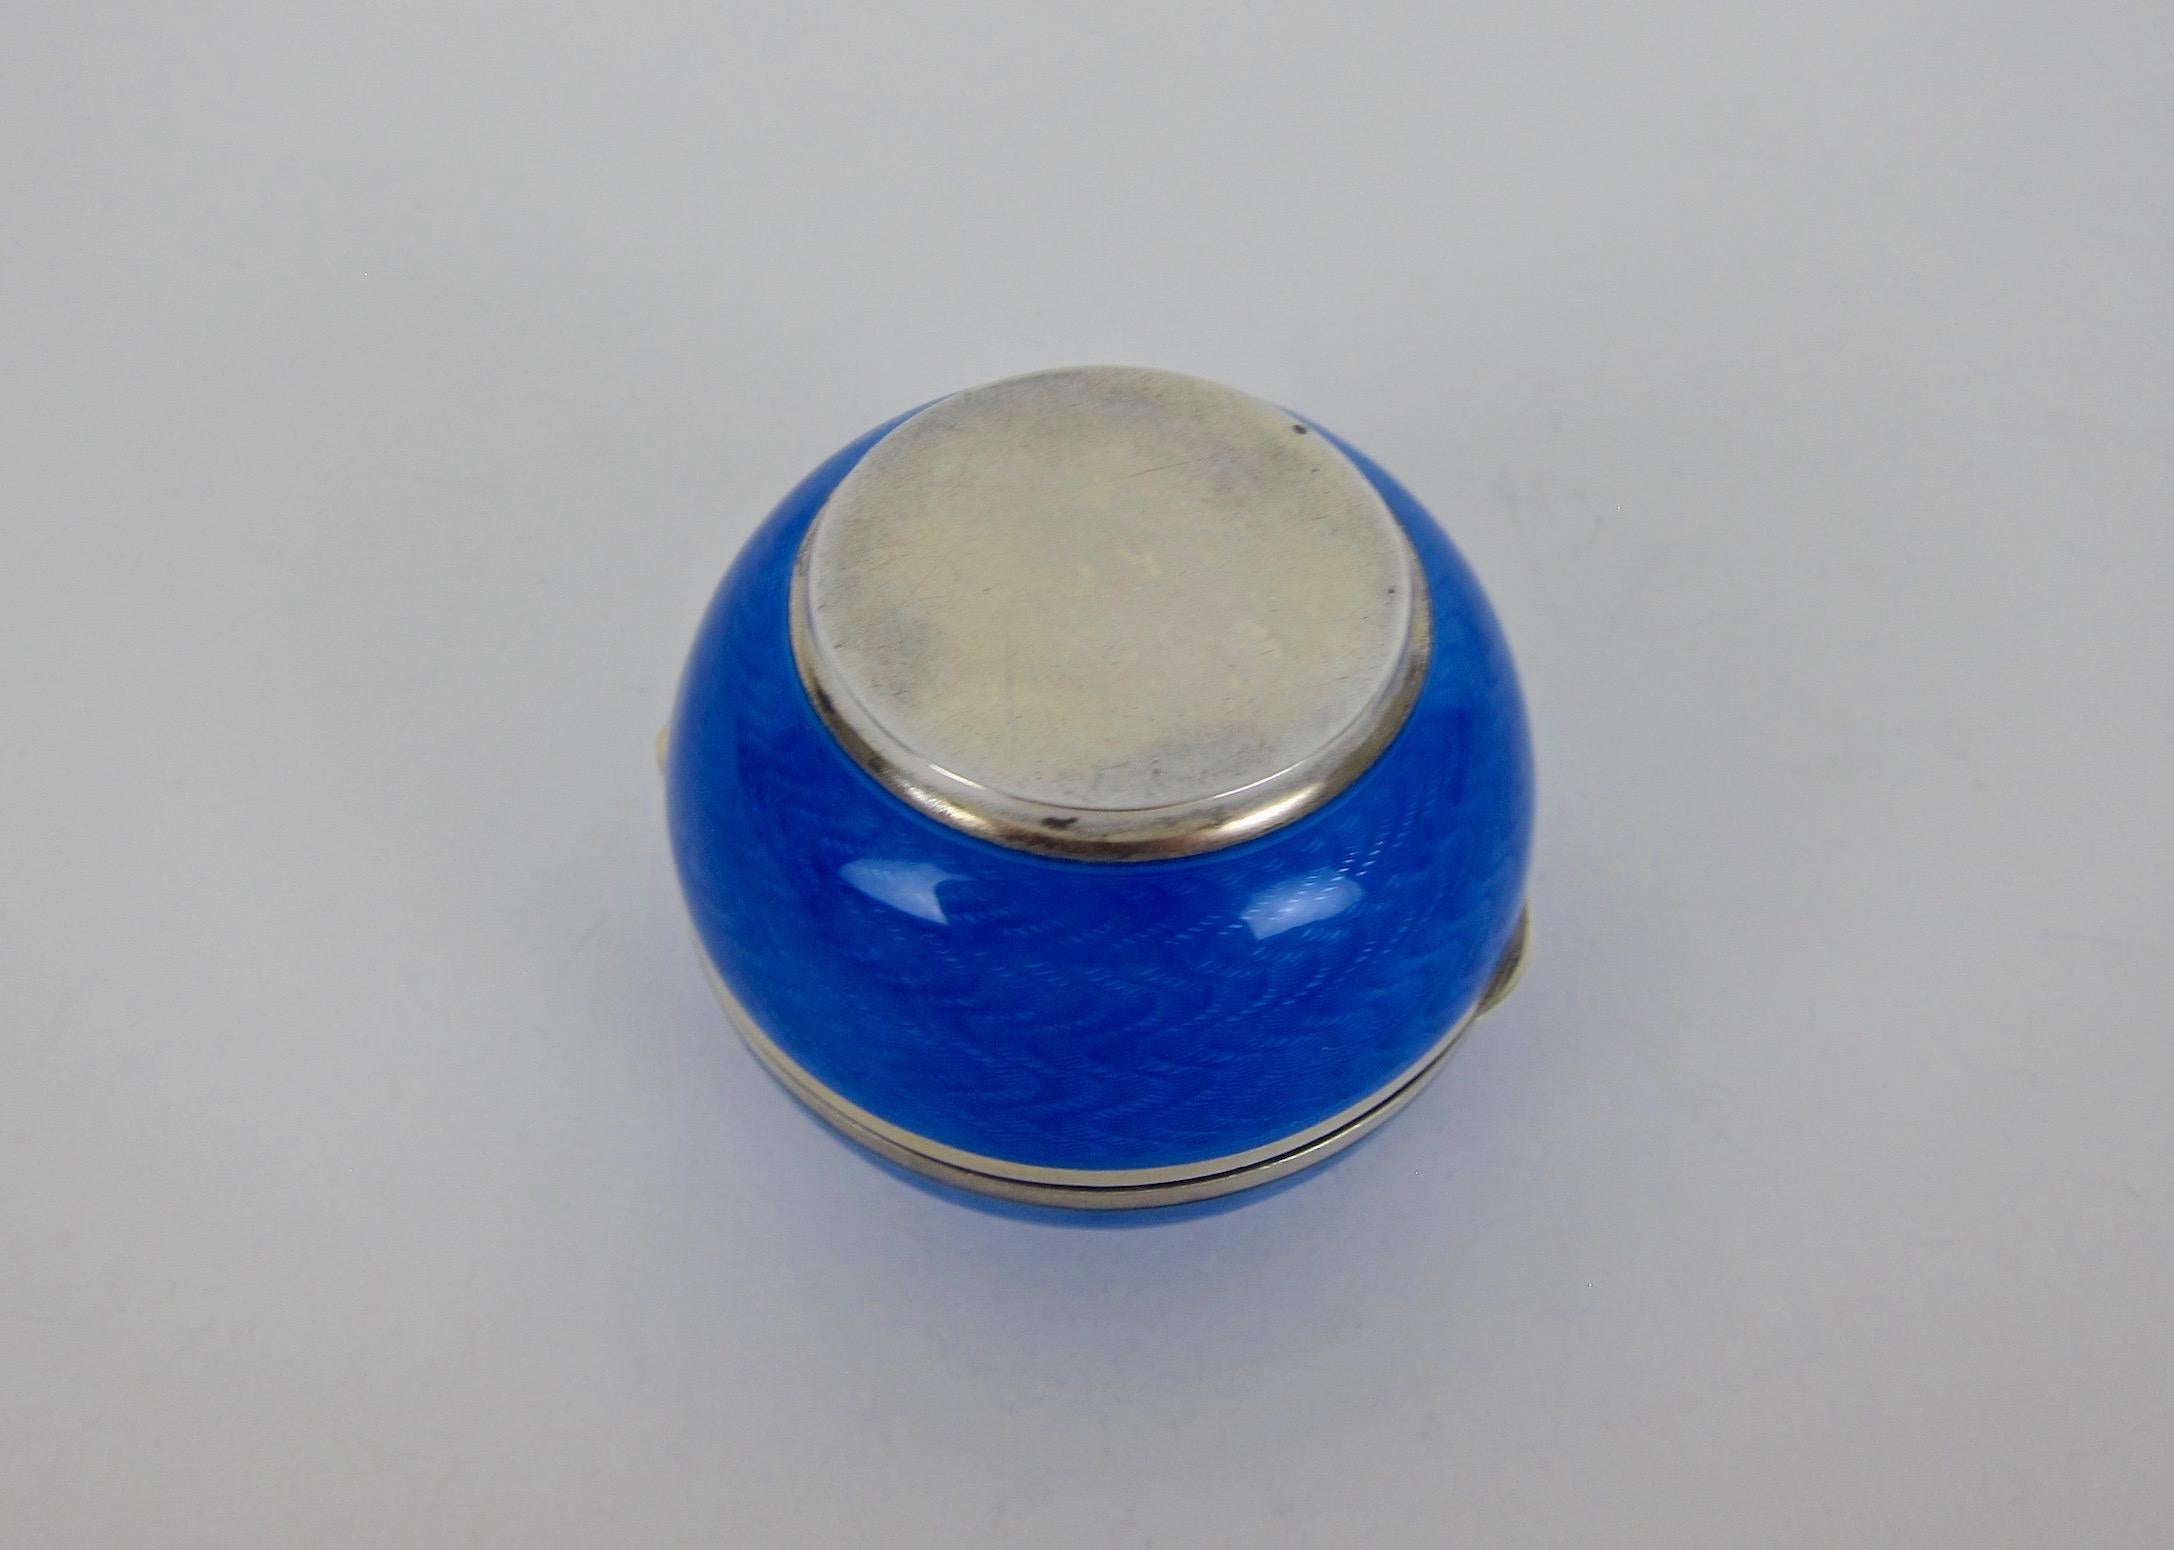 Antique Sterling Silver Gilt Domed Box with Blue Guilloche Enamel 5